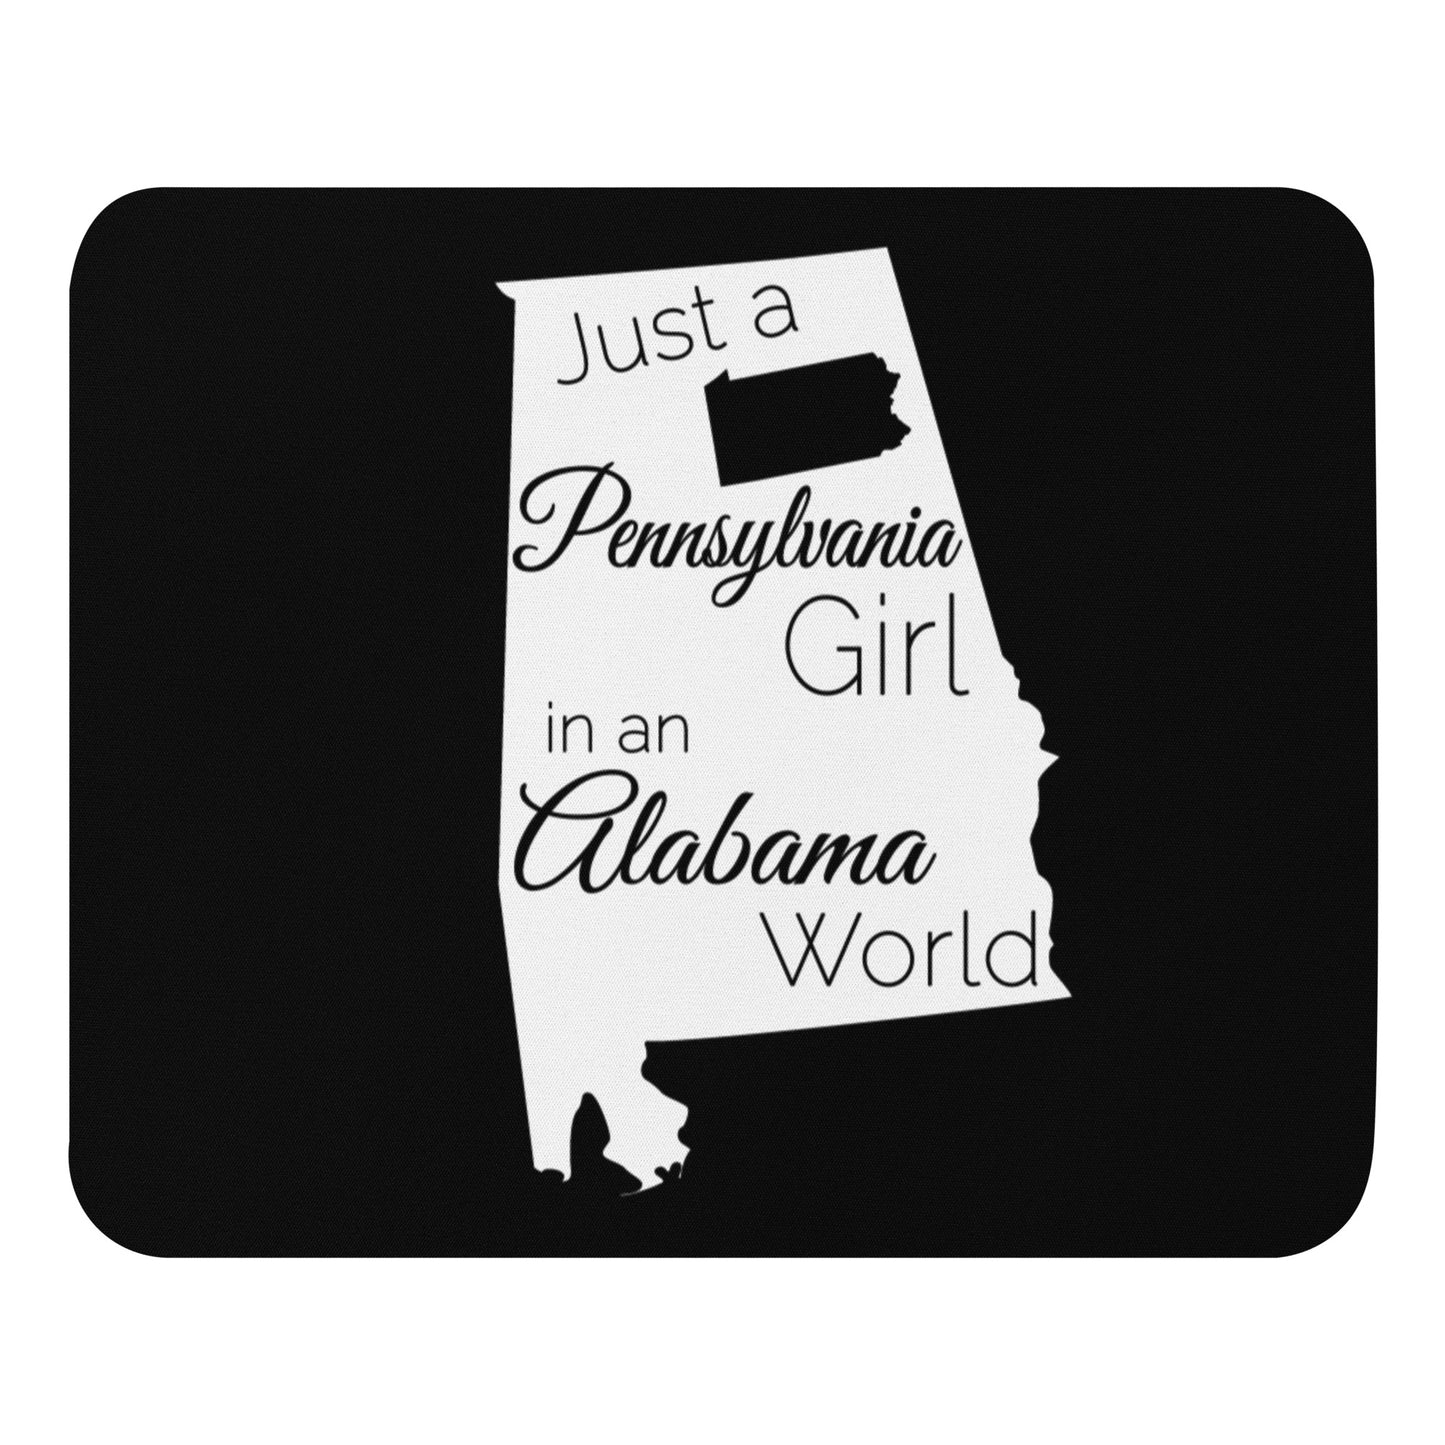 Just a Pennsylvania Girl in an Alabama World Mouse pad